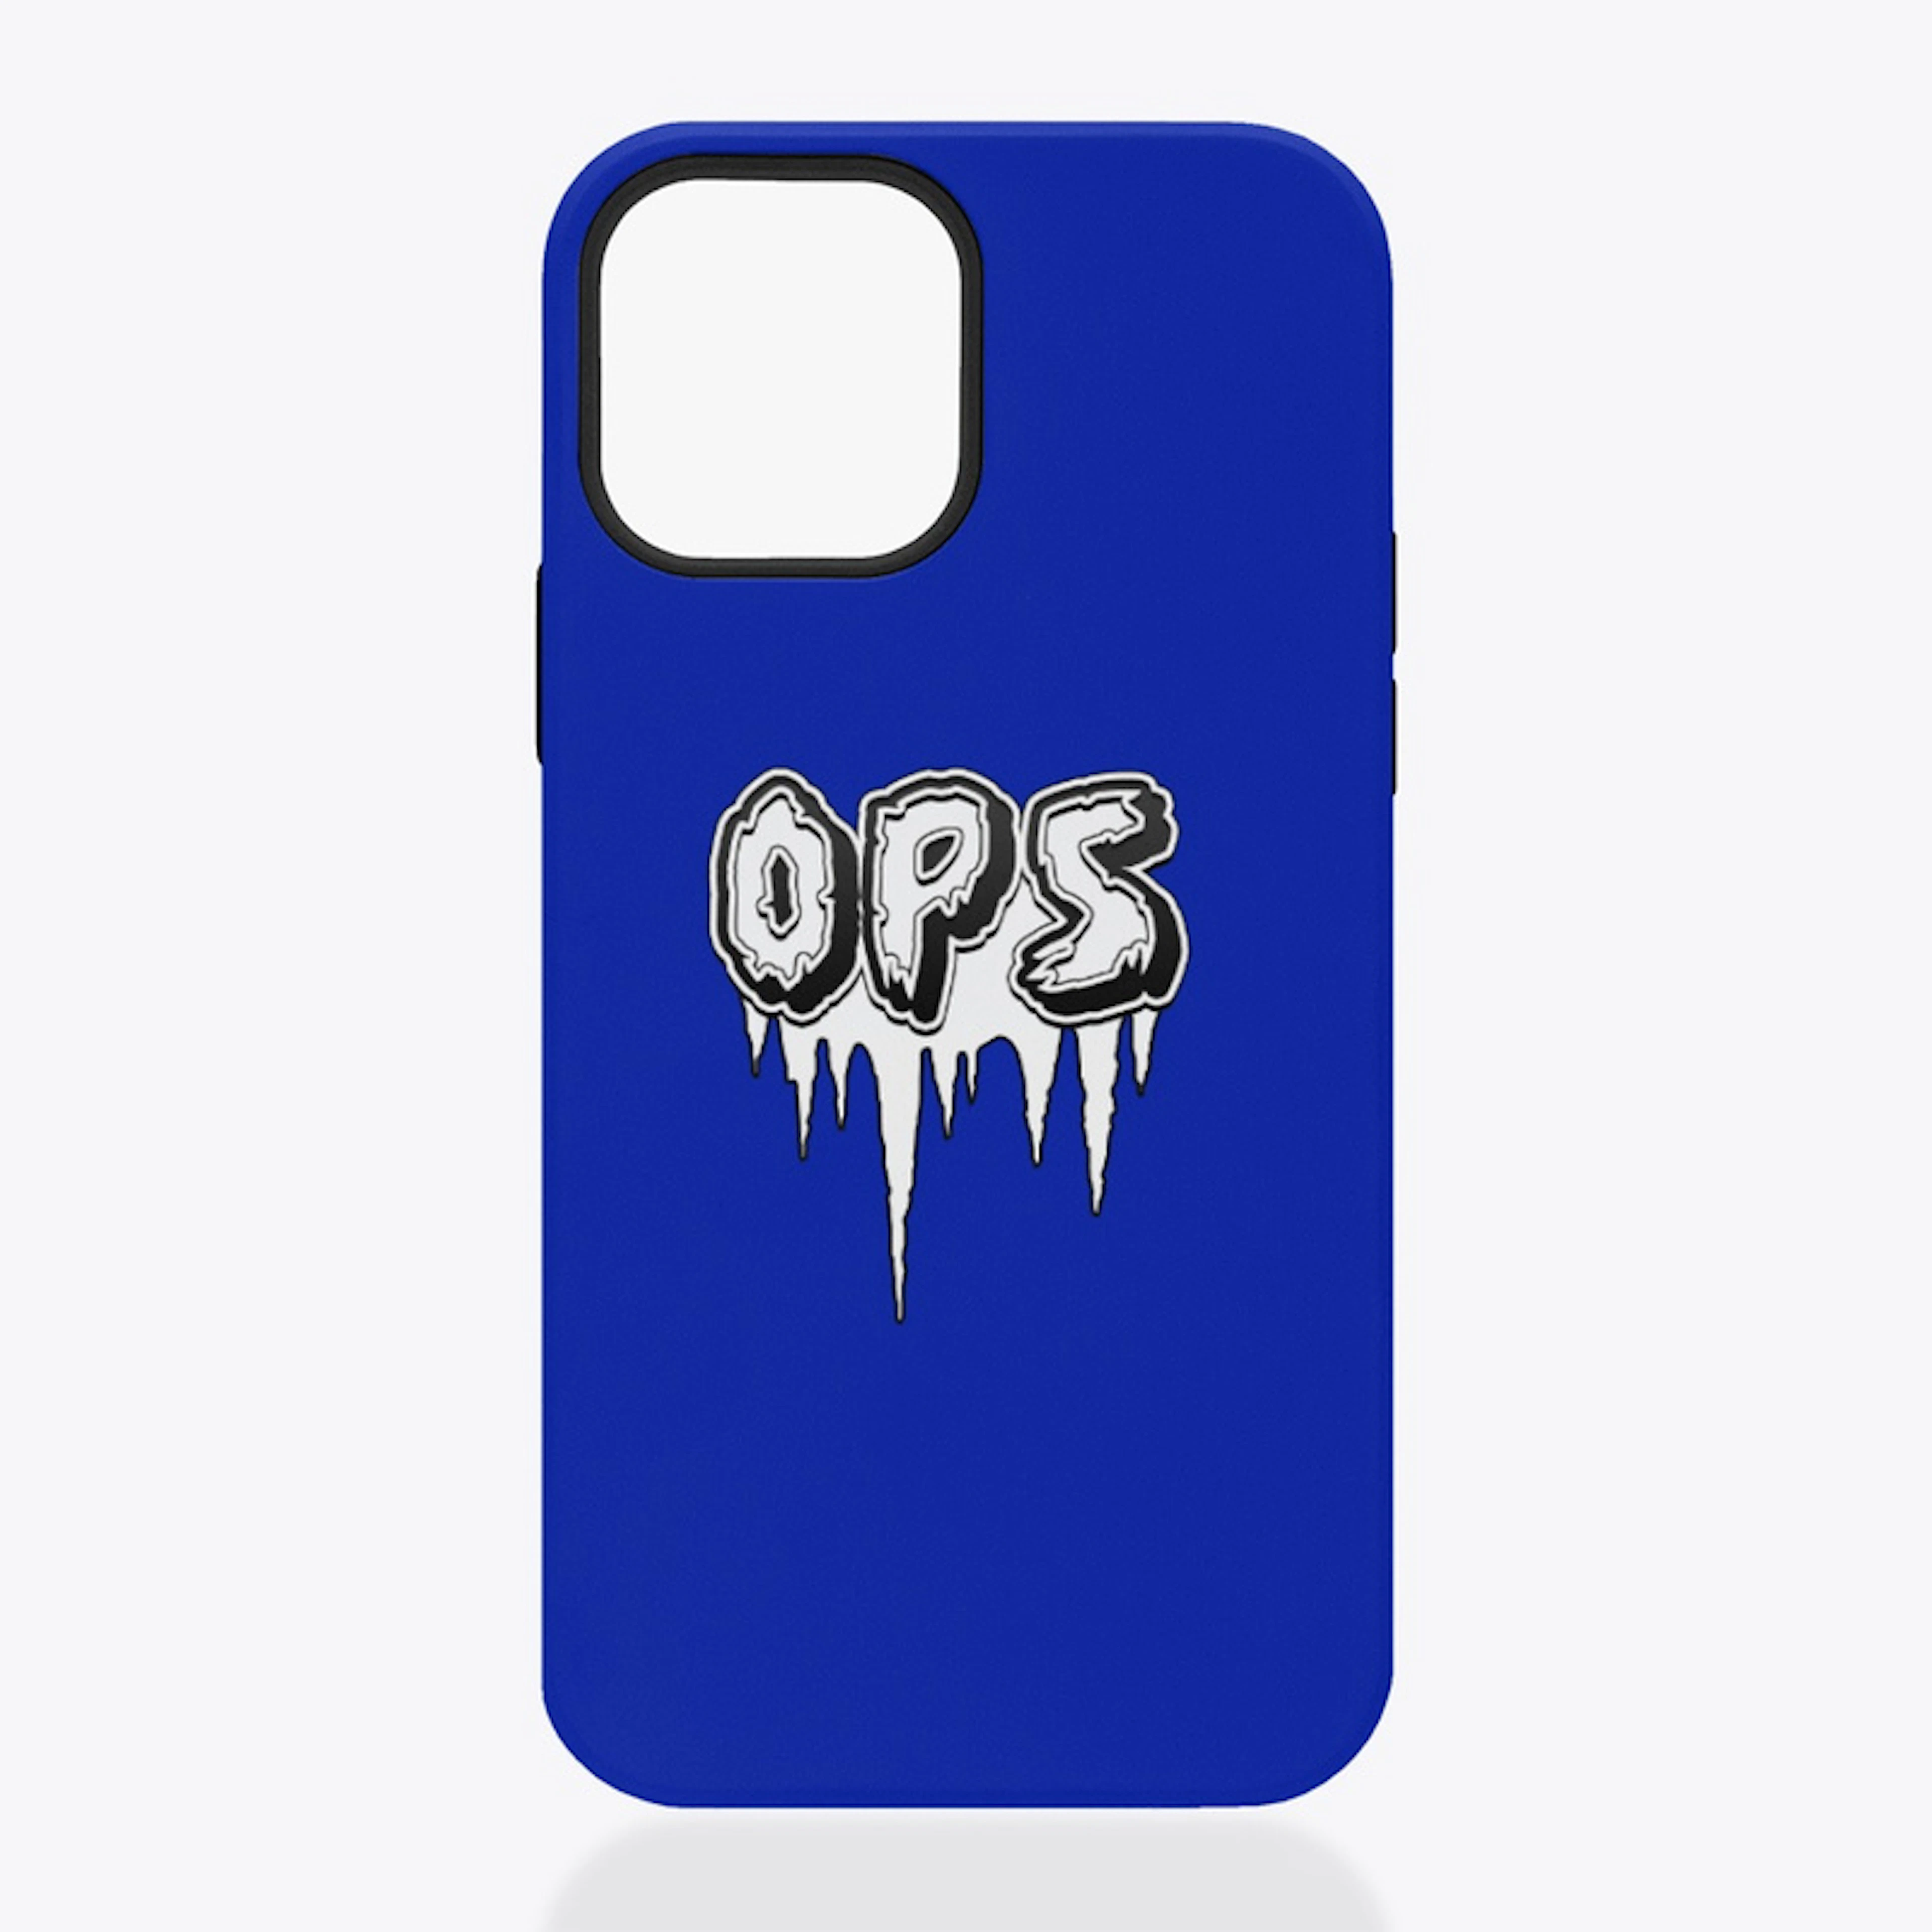 COLD OPS IPHONE CASE